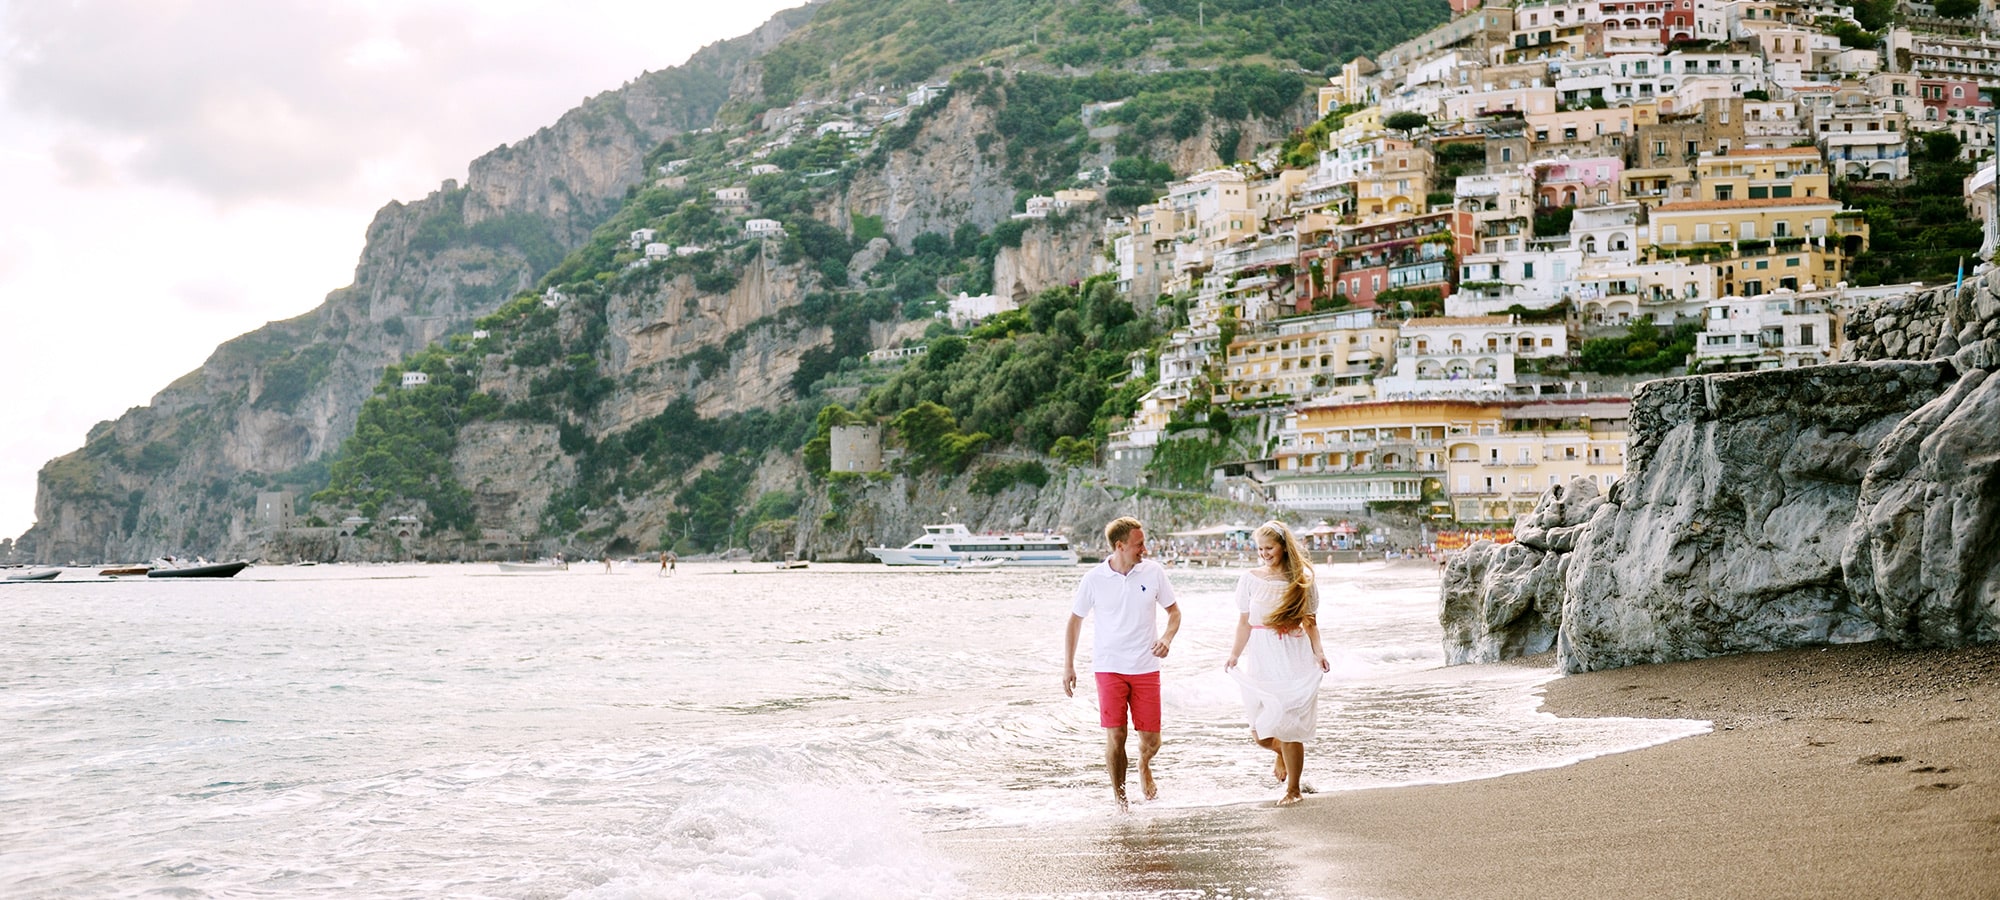 Planning a honeymoon in Italy? Here are the most romantic hotels, restaurants, and things to do along the Amalfi Coast.